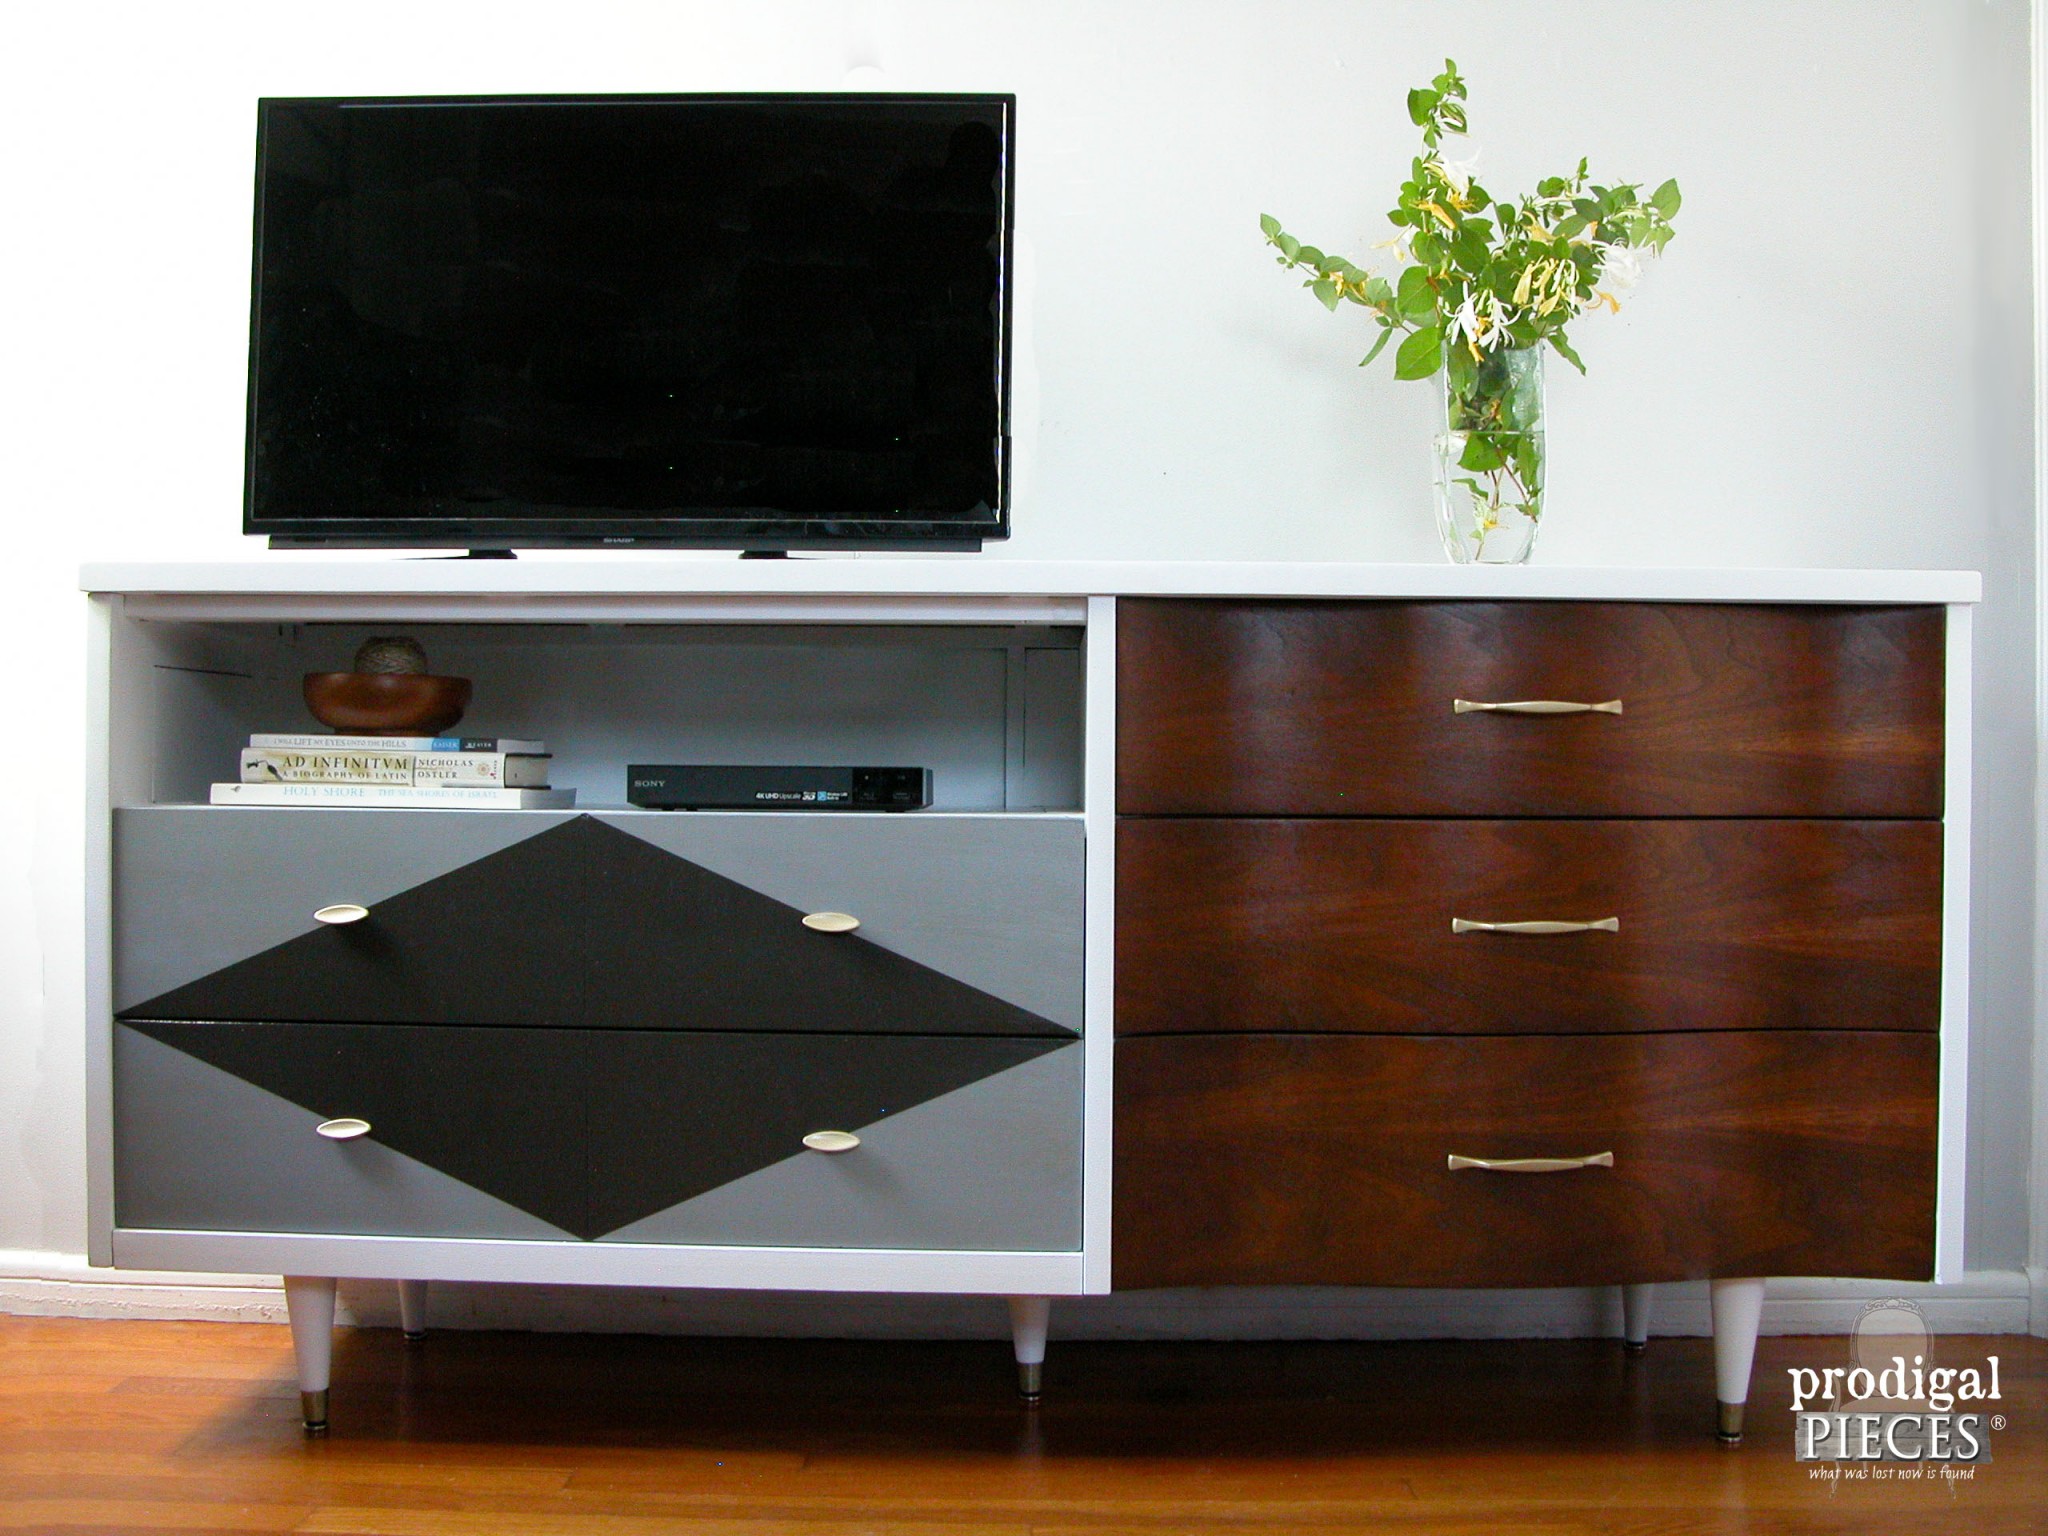 Mid Century Modern Entertainment Console Credenza by Prodigal Pieces | www.prodigalpieces.com